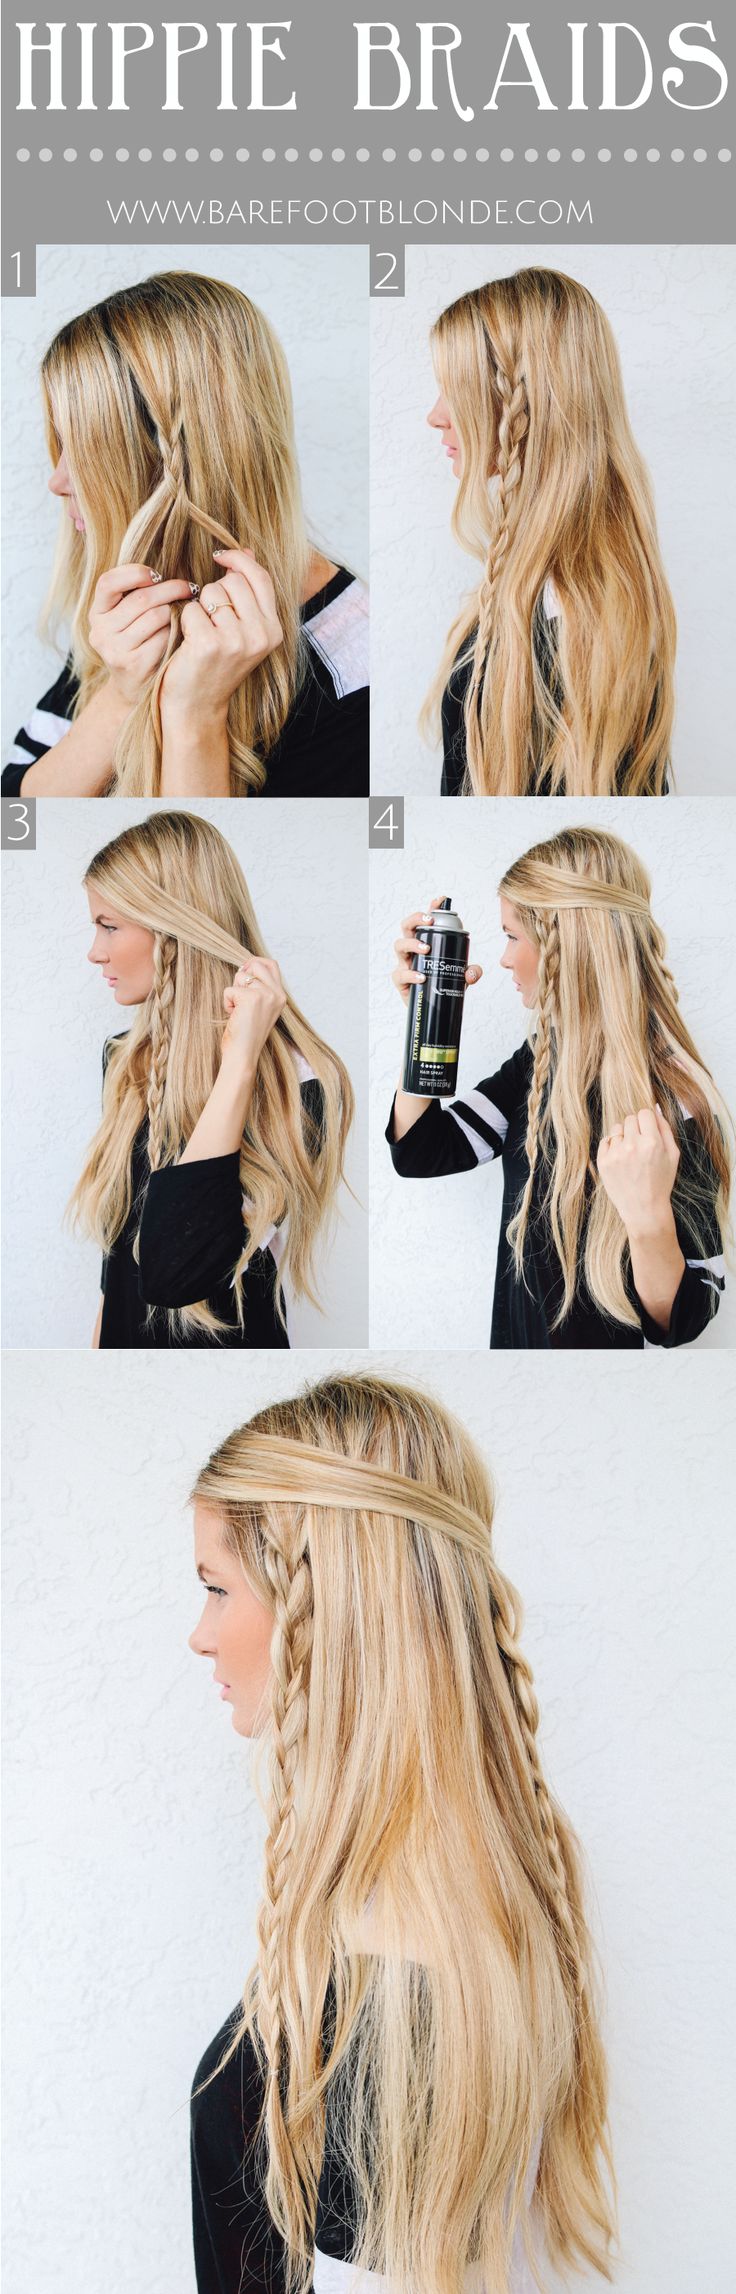 Hippie Braids for Long Blonde Hairstyles